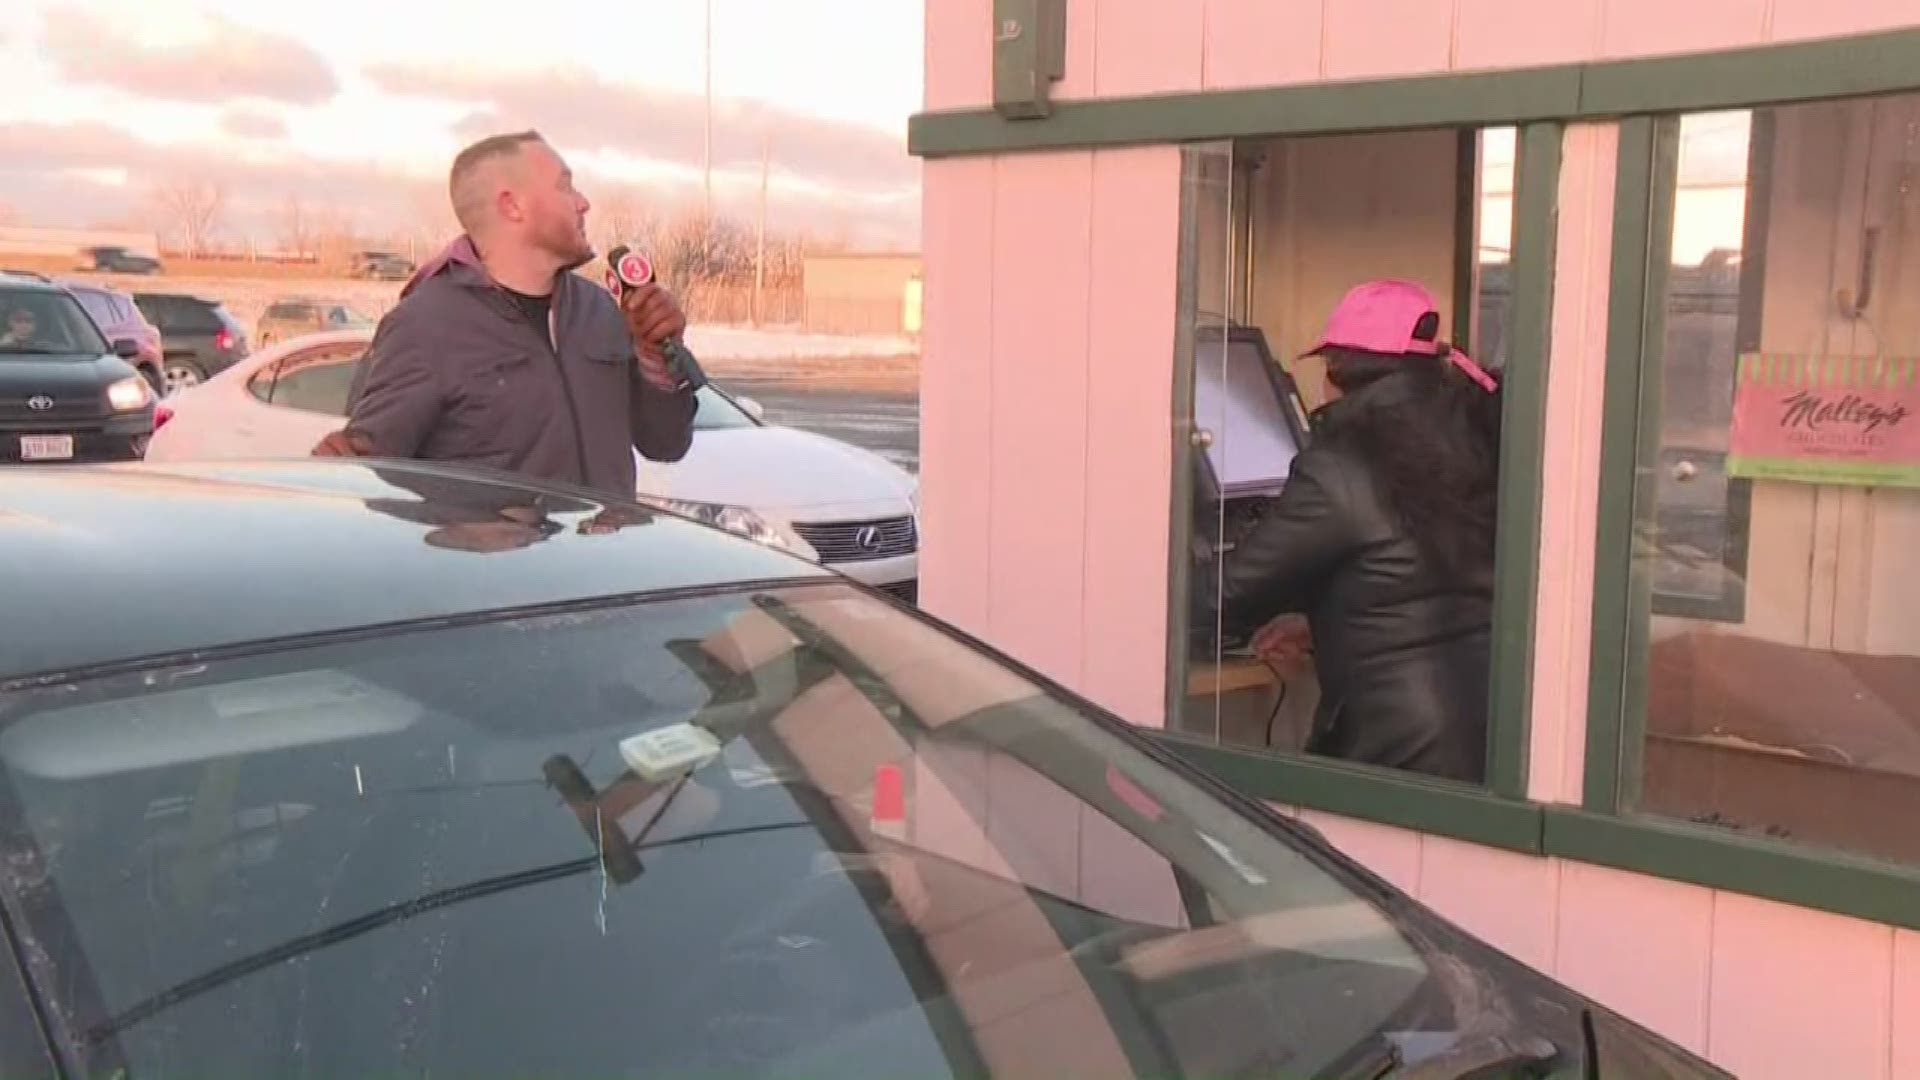 Some procrastinators are waiting until the last minute to get their loved ones a gift. Mike Polk Jr. checks out the drive-thru at Malley's.